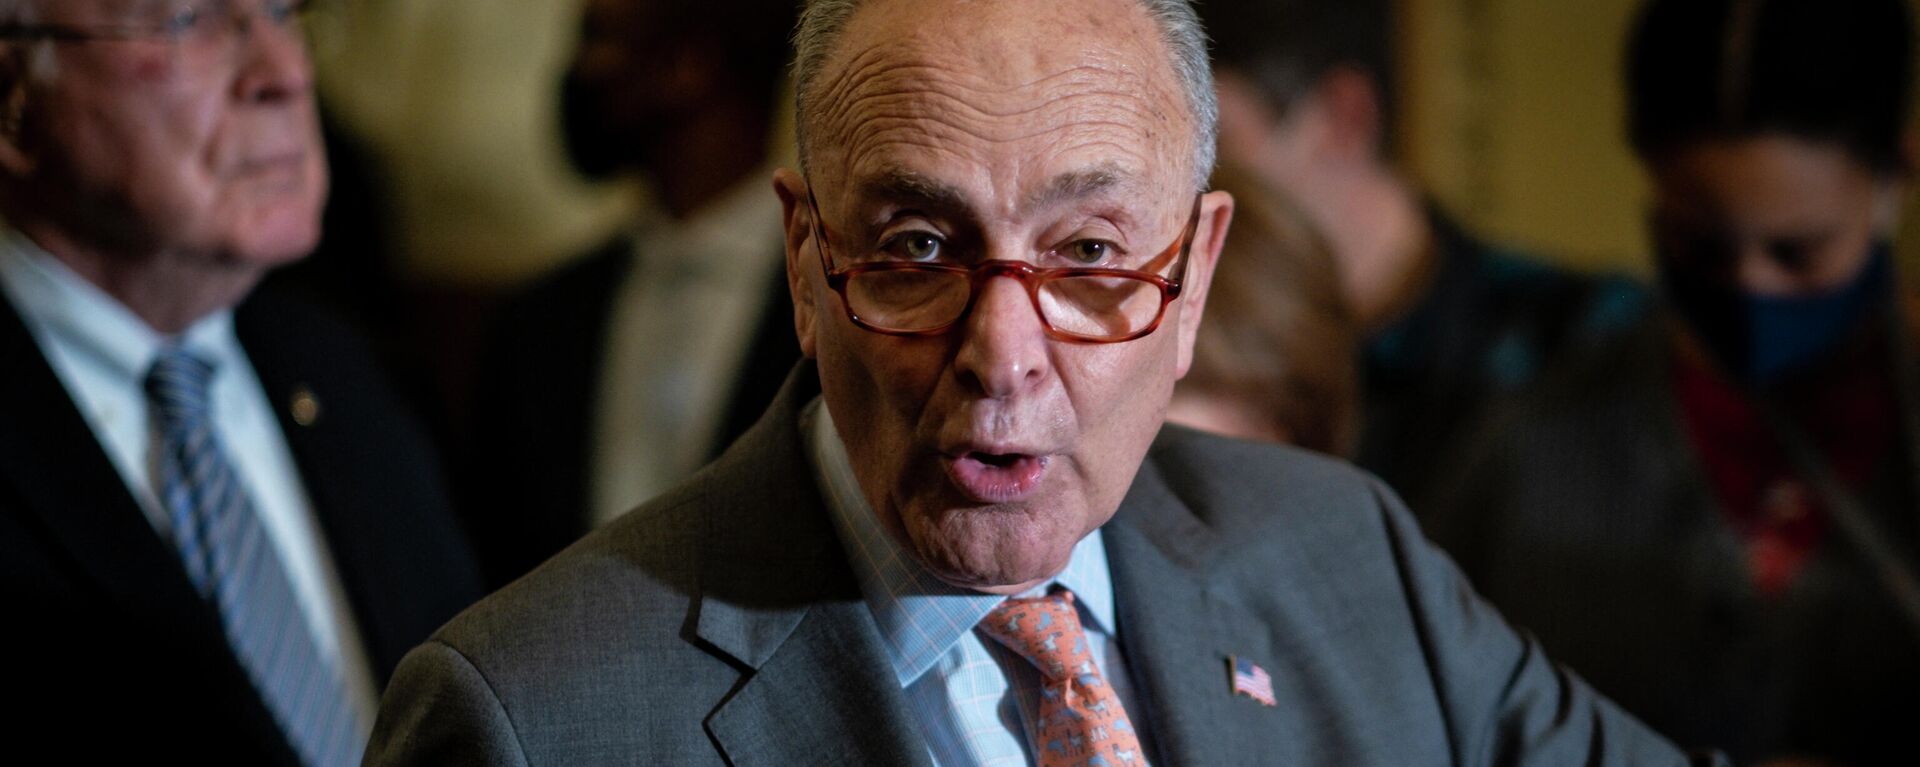 Senate Majority Leader Chuck Schumer (D-NY) speaks during a press availability following the democratic caucus luncheon at the United States Capitol on November 2, 2021 in Washington, DC.   - Sputnik International, 1920, 17.03.2022